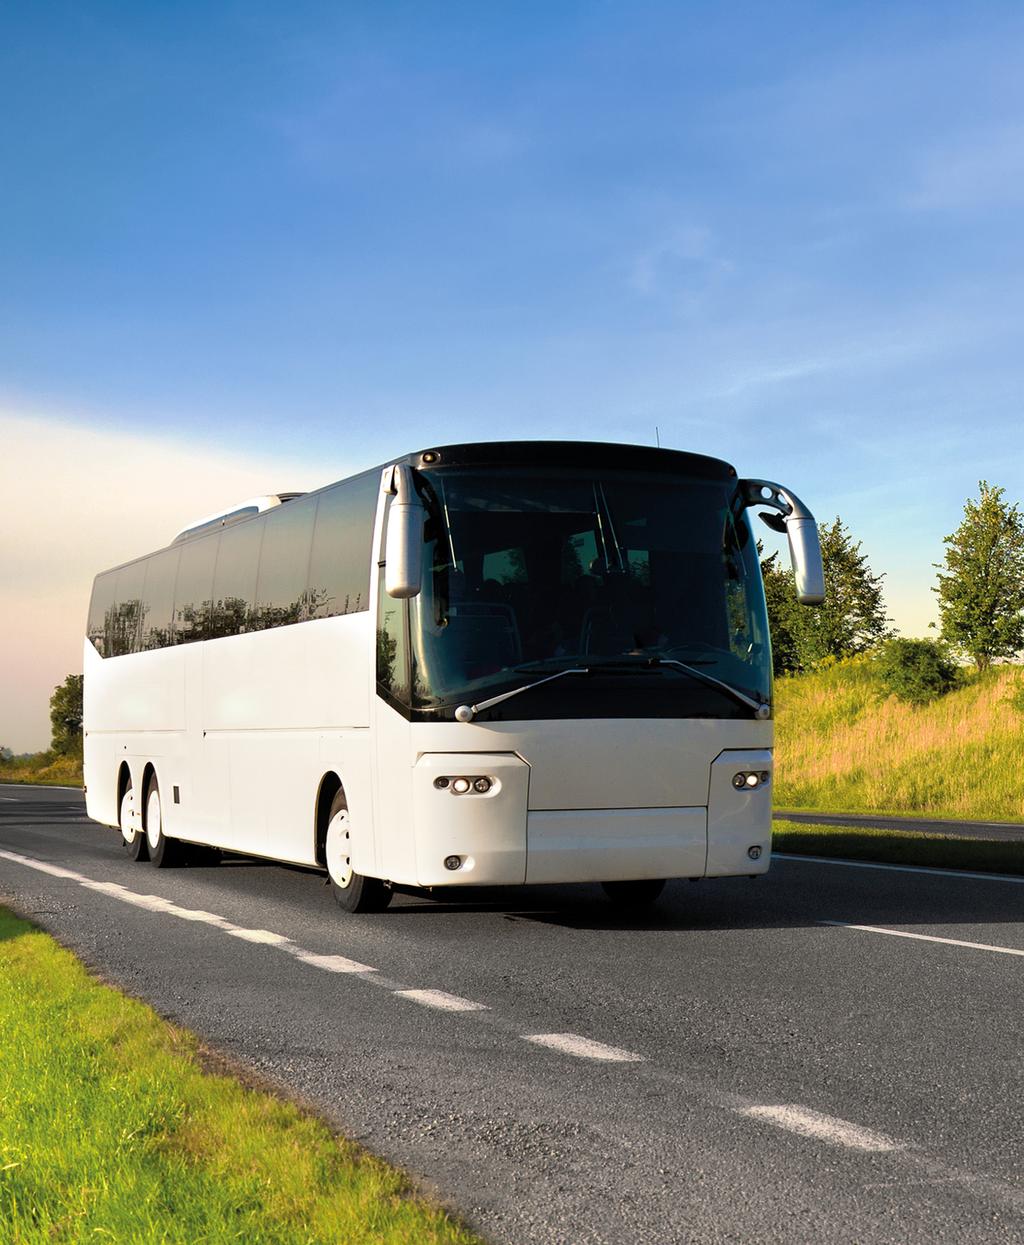 DONALDSON DELIVERS Filtration Solutions for Bus Fleets High quality bus engine filtration,